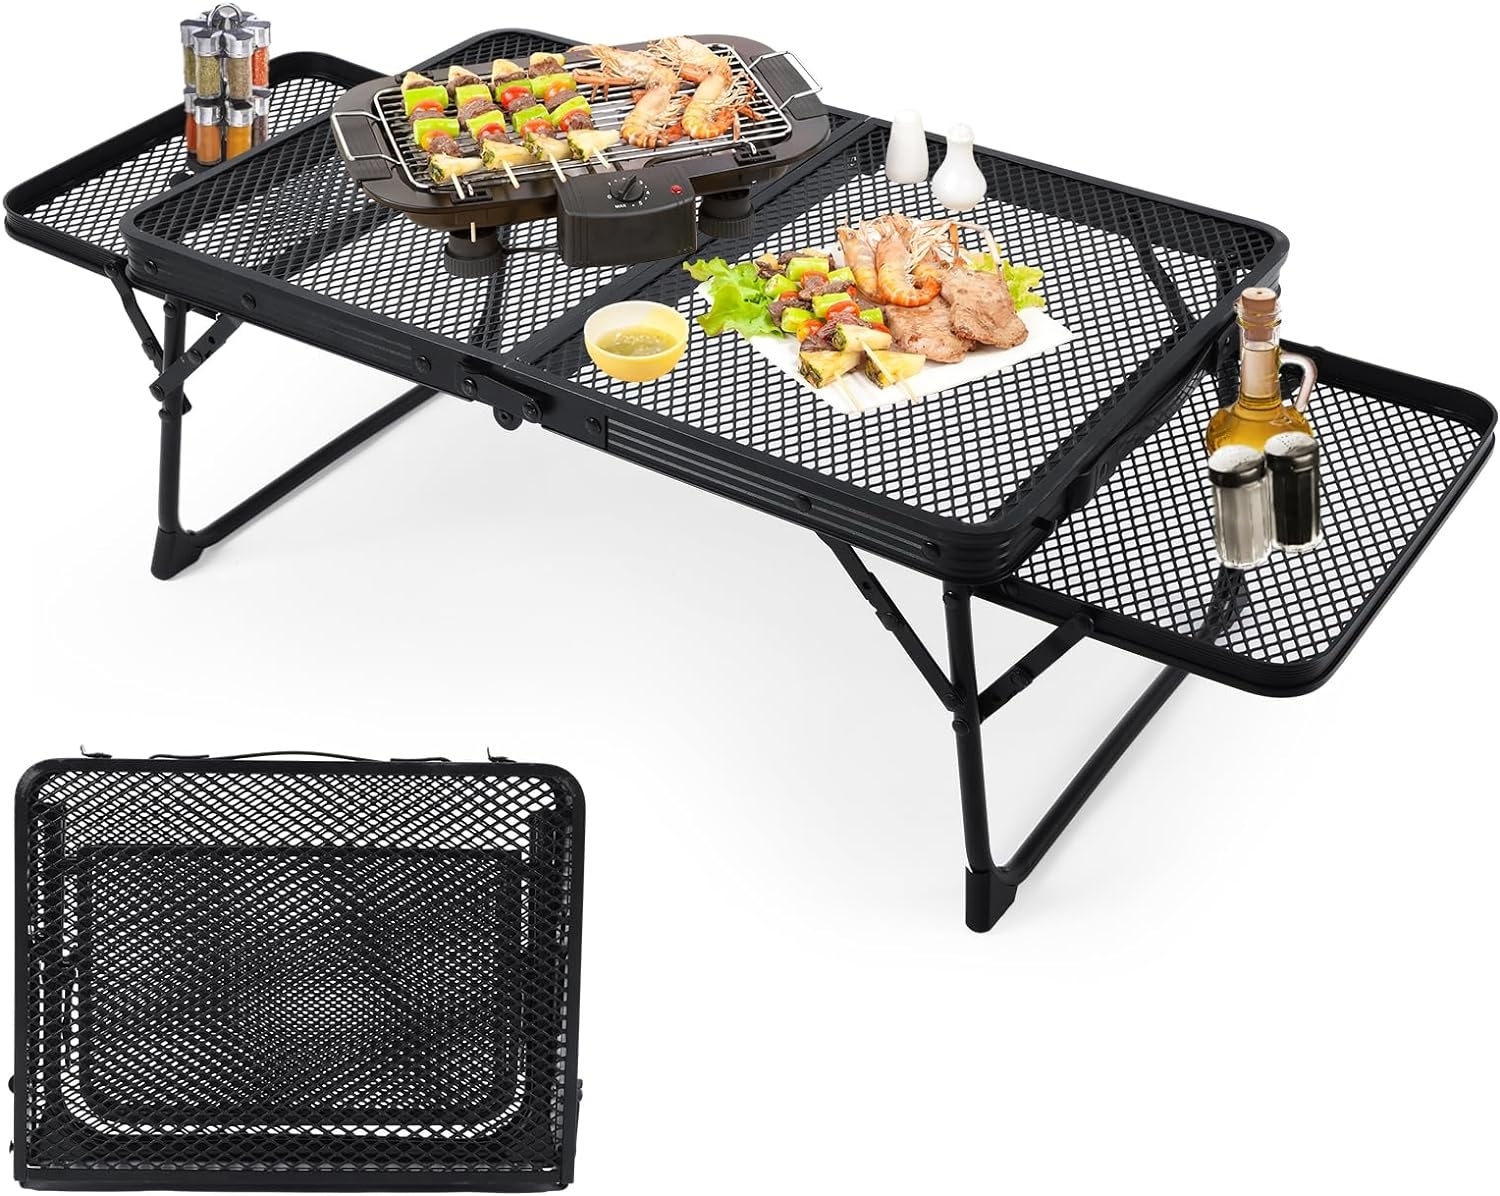 Portable table with built-in grill surrounded by food items, condiments, and empty seats for outdoor dining